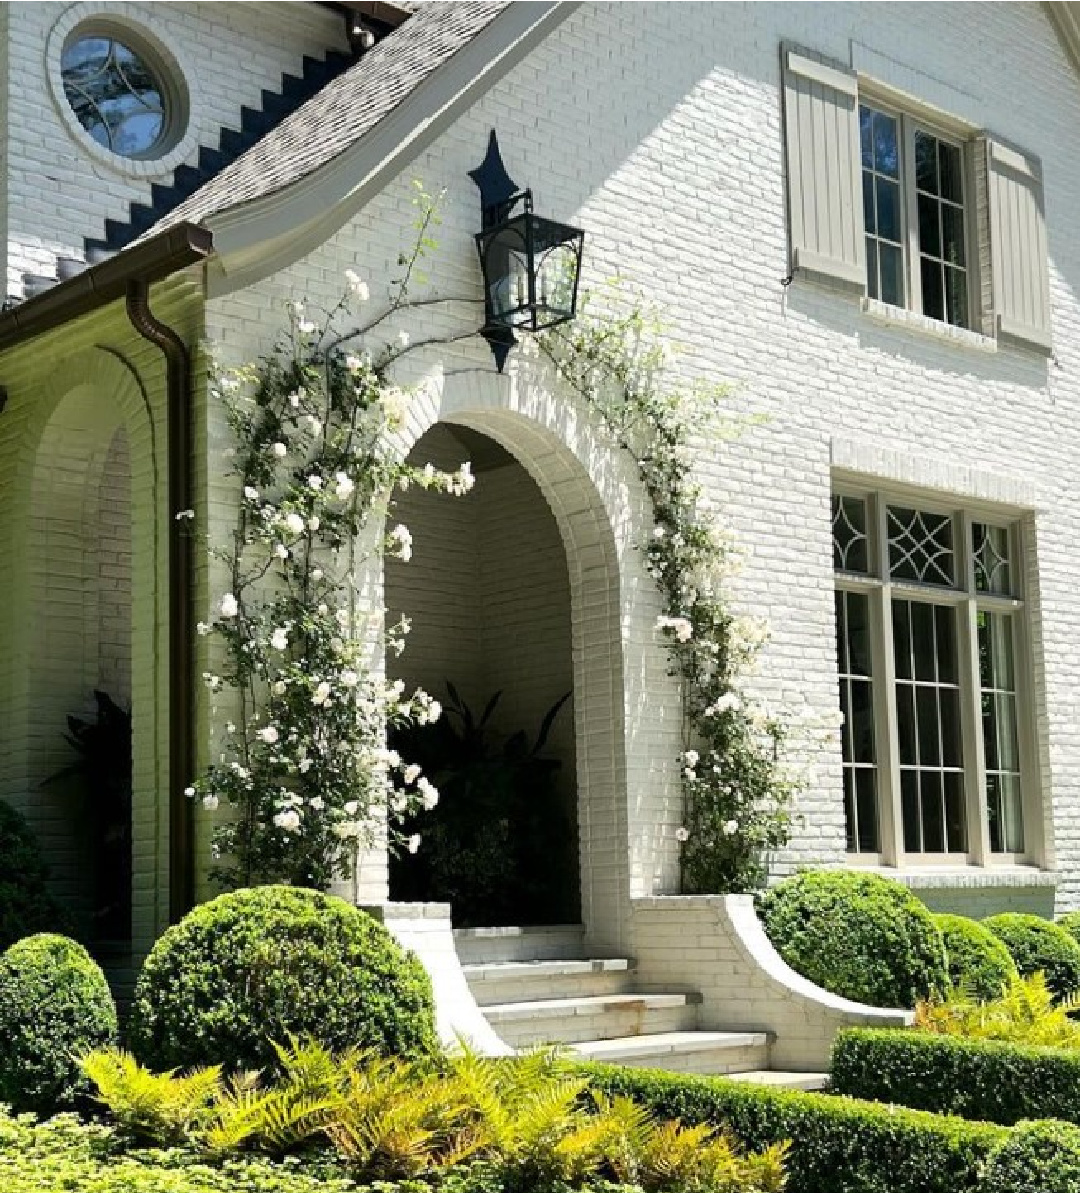 Breathtaking storybook charm of a Tudor style white painted brick home renovated by @ladisicfinehomes with arched entrance softened by creeping vines - photo by Sherry Hart.